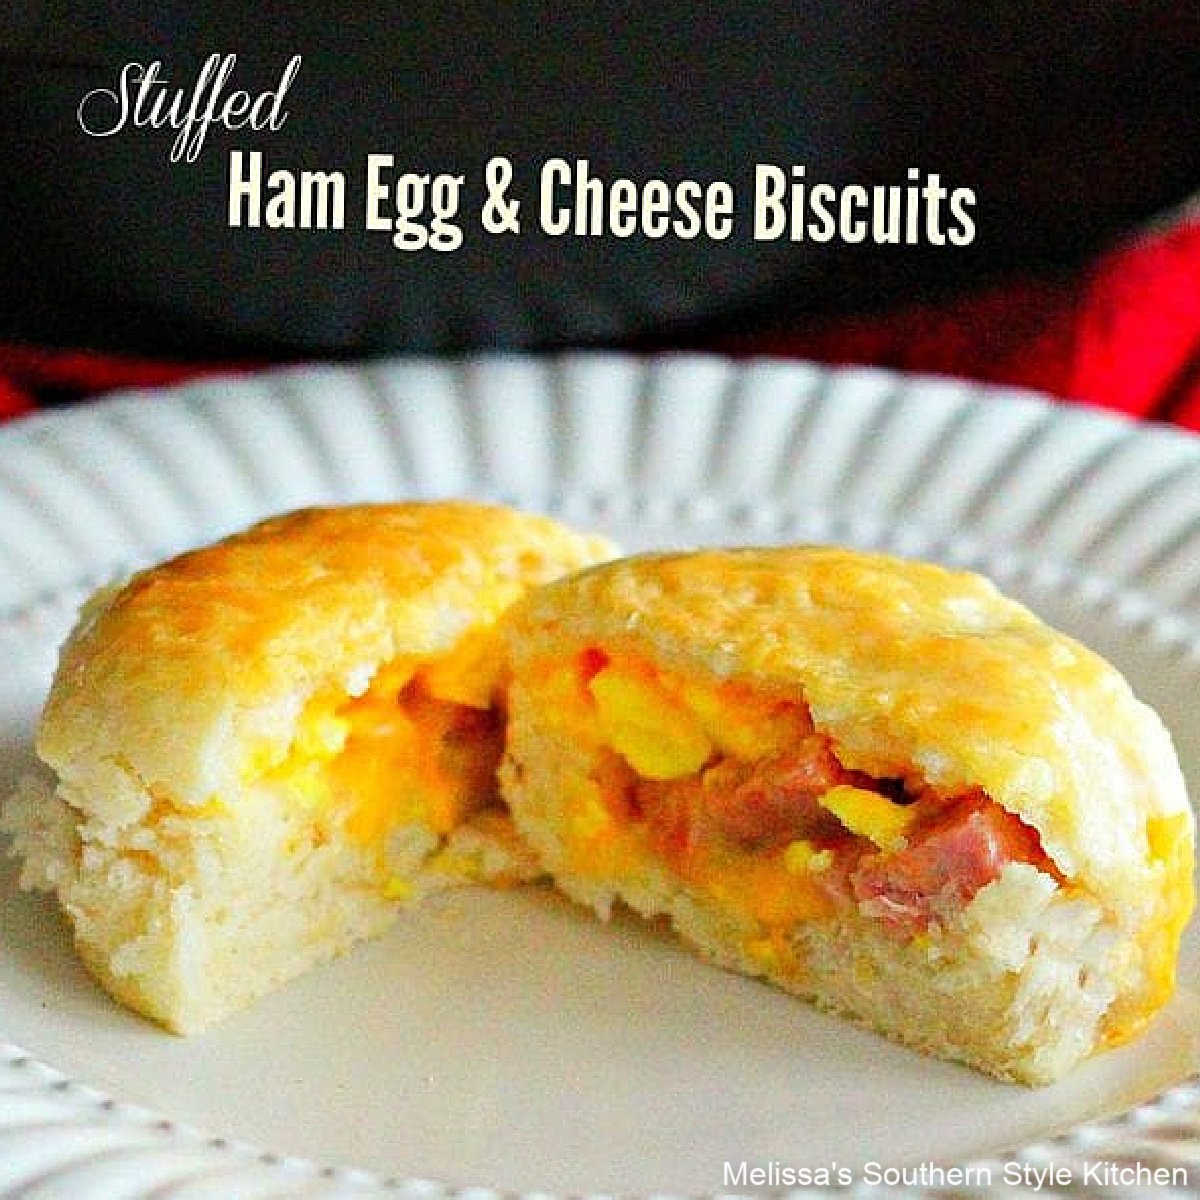 https://www.melissassouthernstylekitchen.com/wp-content/uploads/2019/04/stuffed-ham-egg-and-cheese-biscuitsfeature.jpg